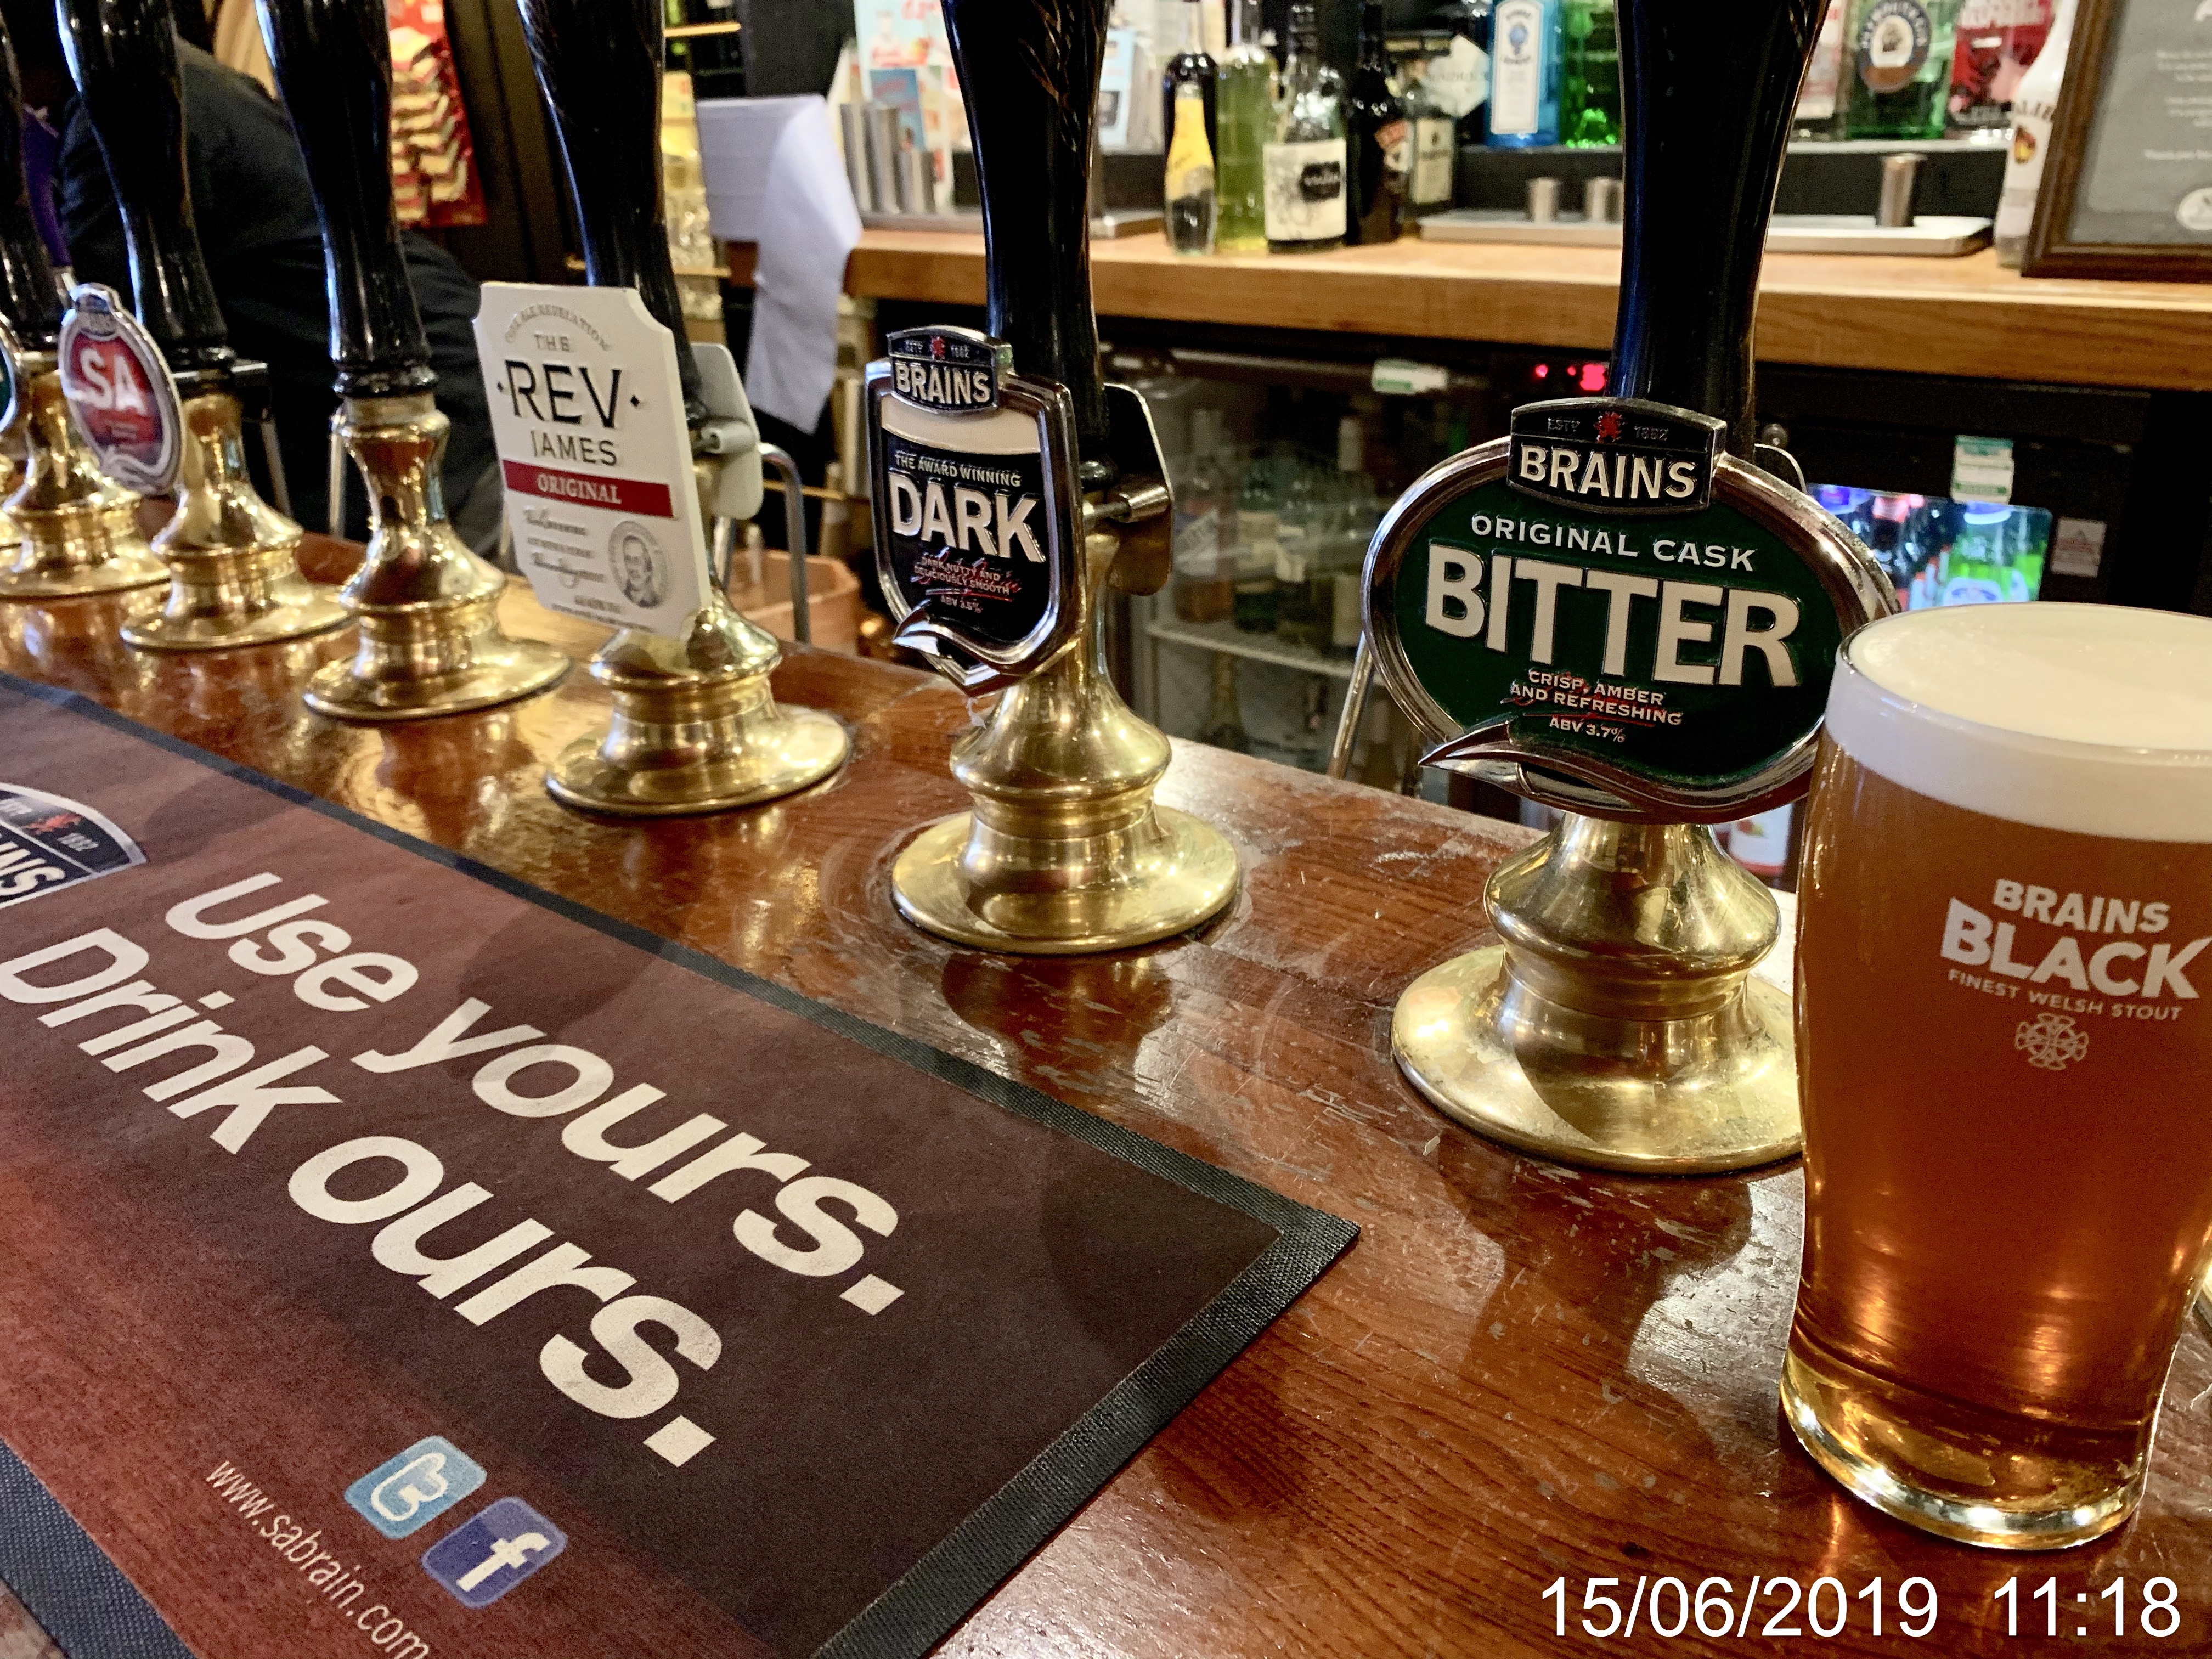 A row of Brains hand pumps in The Cottage, Cardiff. 